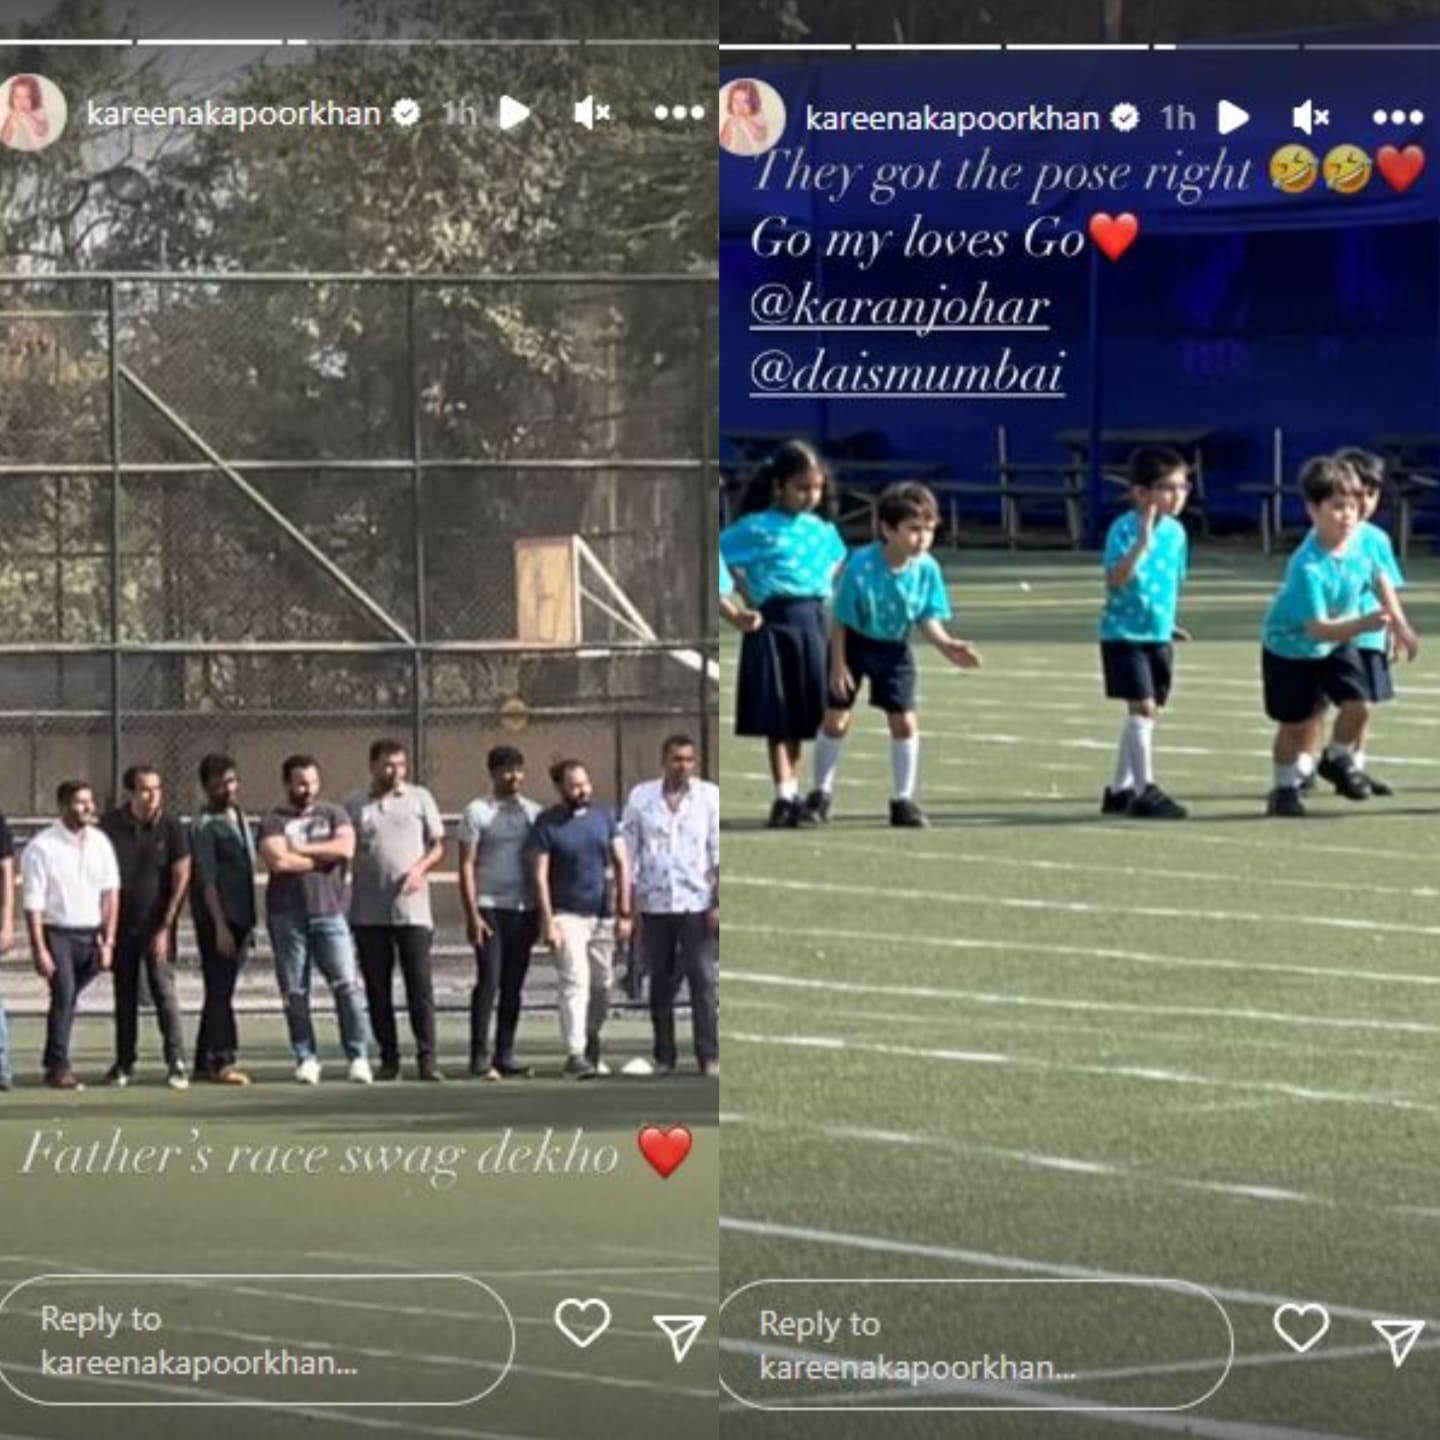 Kareena posted the photos seemingly from a Sports Day event held in Taimur's school.